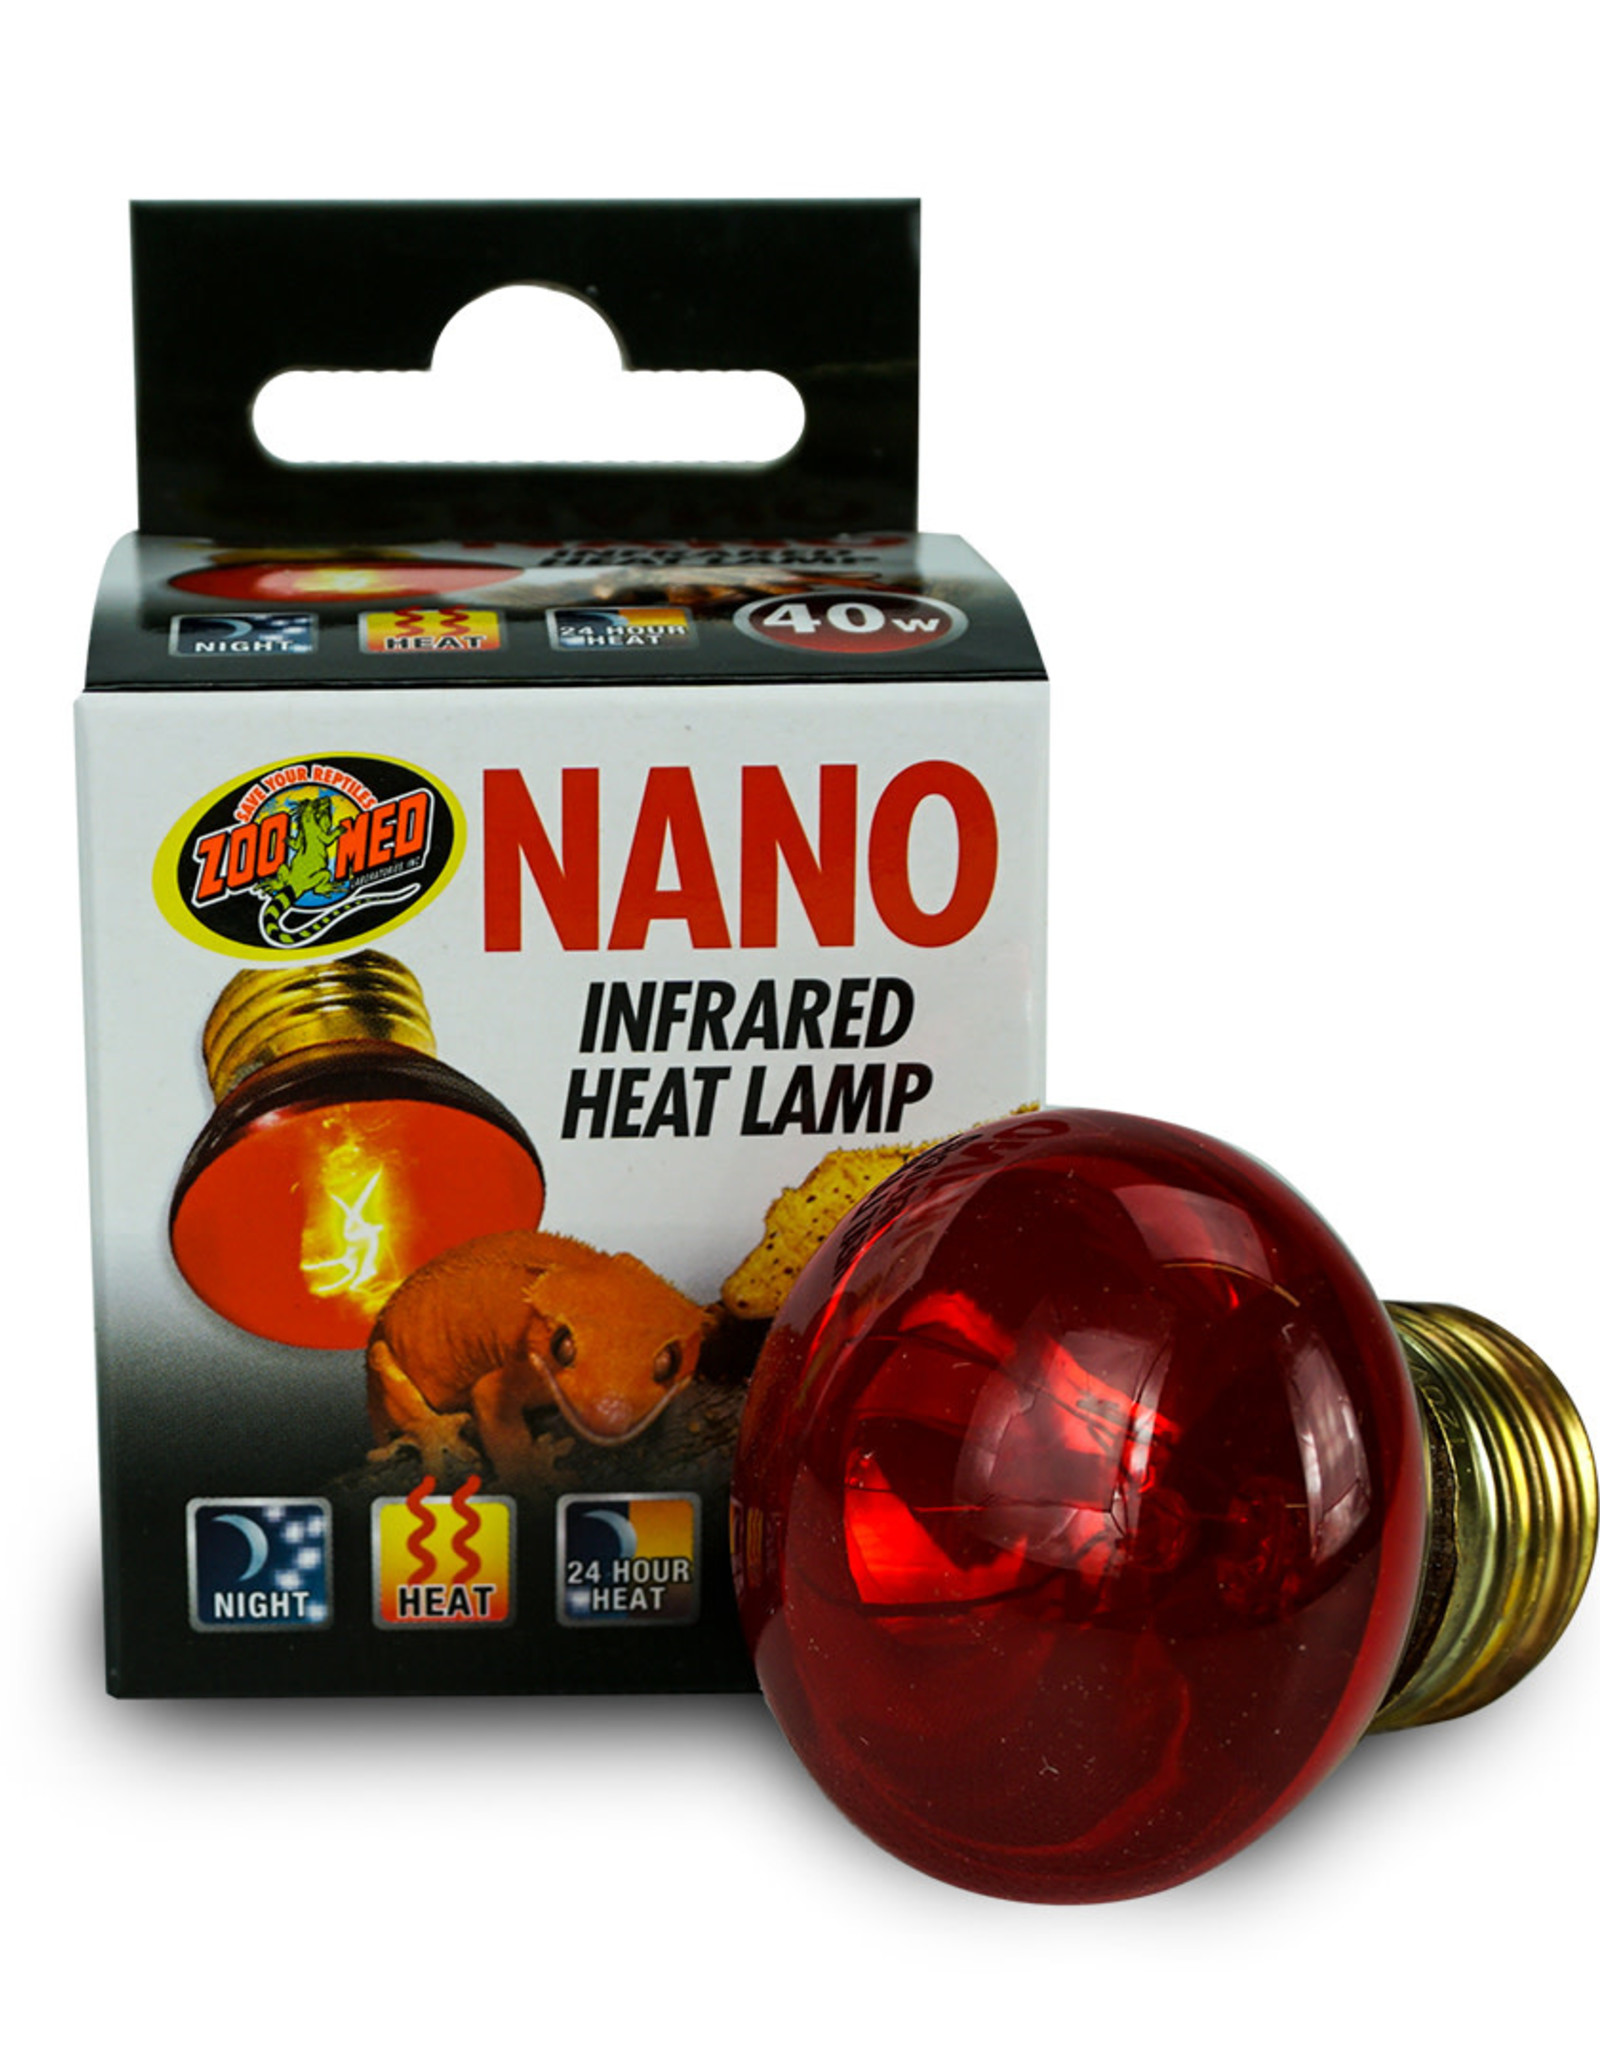 ZOO MED LABORATORIES, INC. ZOO MED- RS-40N- NOCTURNAL- INFRARED- HEAT LAMP/BULB- 3X3X4- 40W- NANO